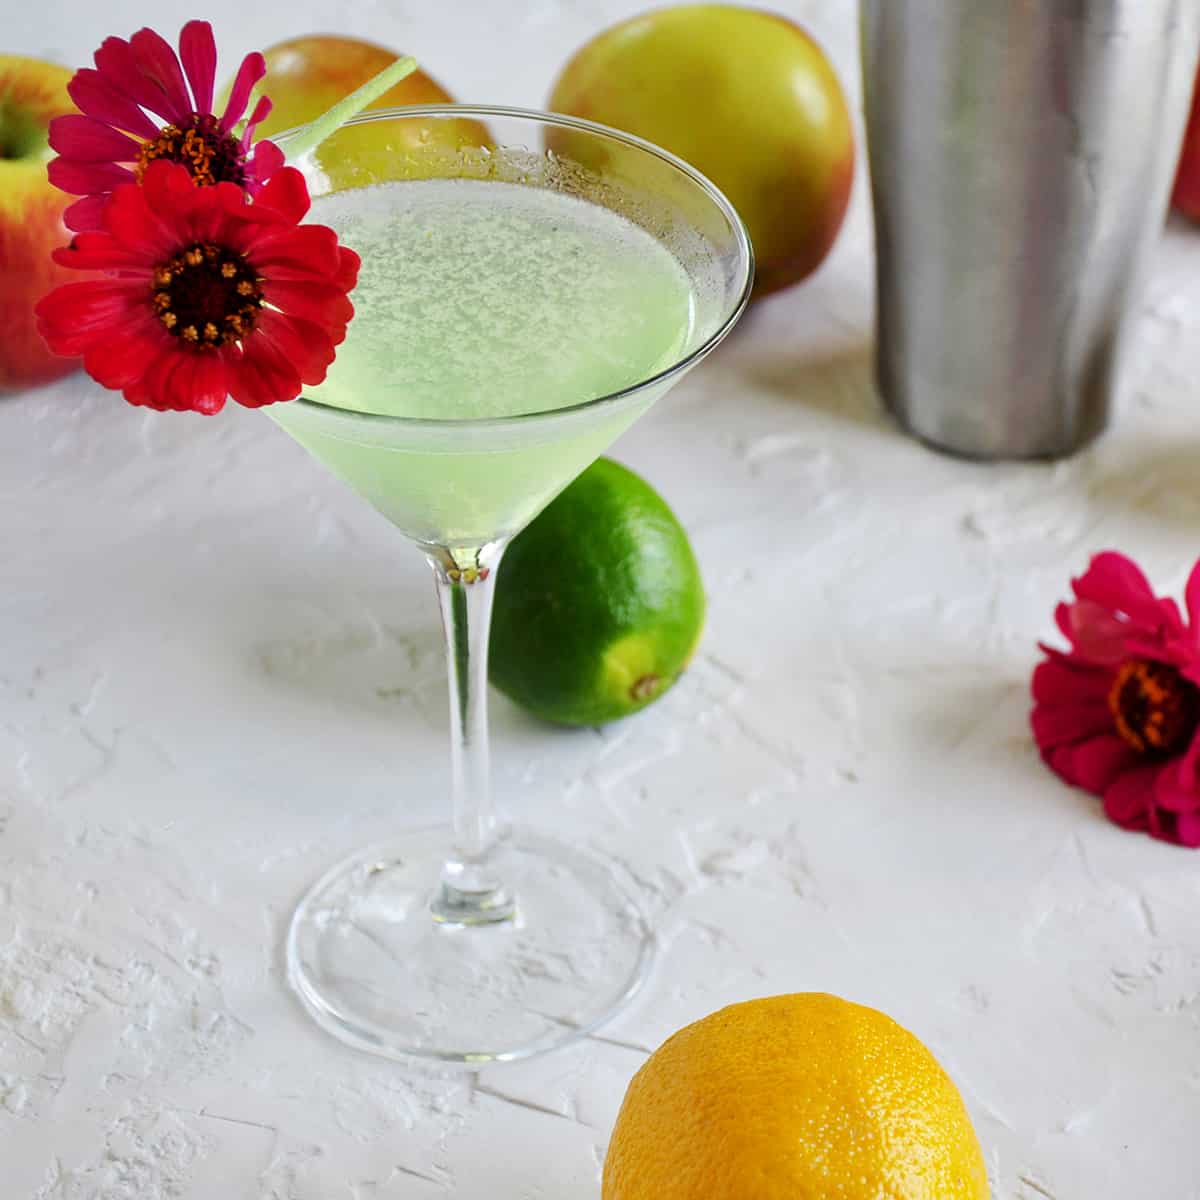 Appletini with lemons, limes, apples and flowers in the background.